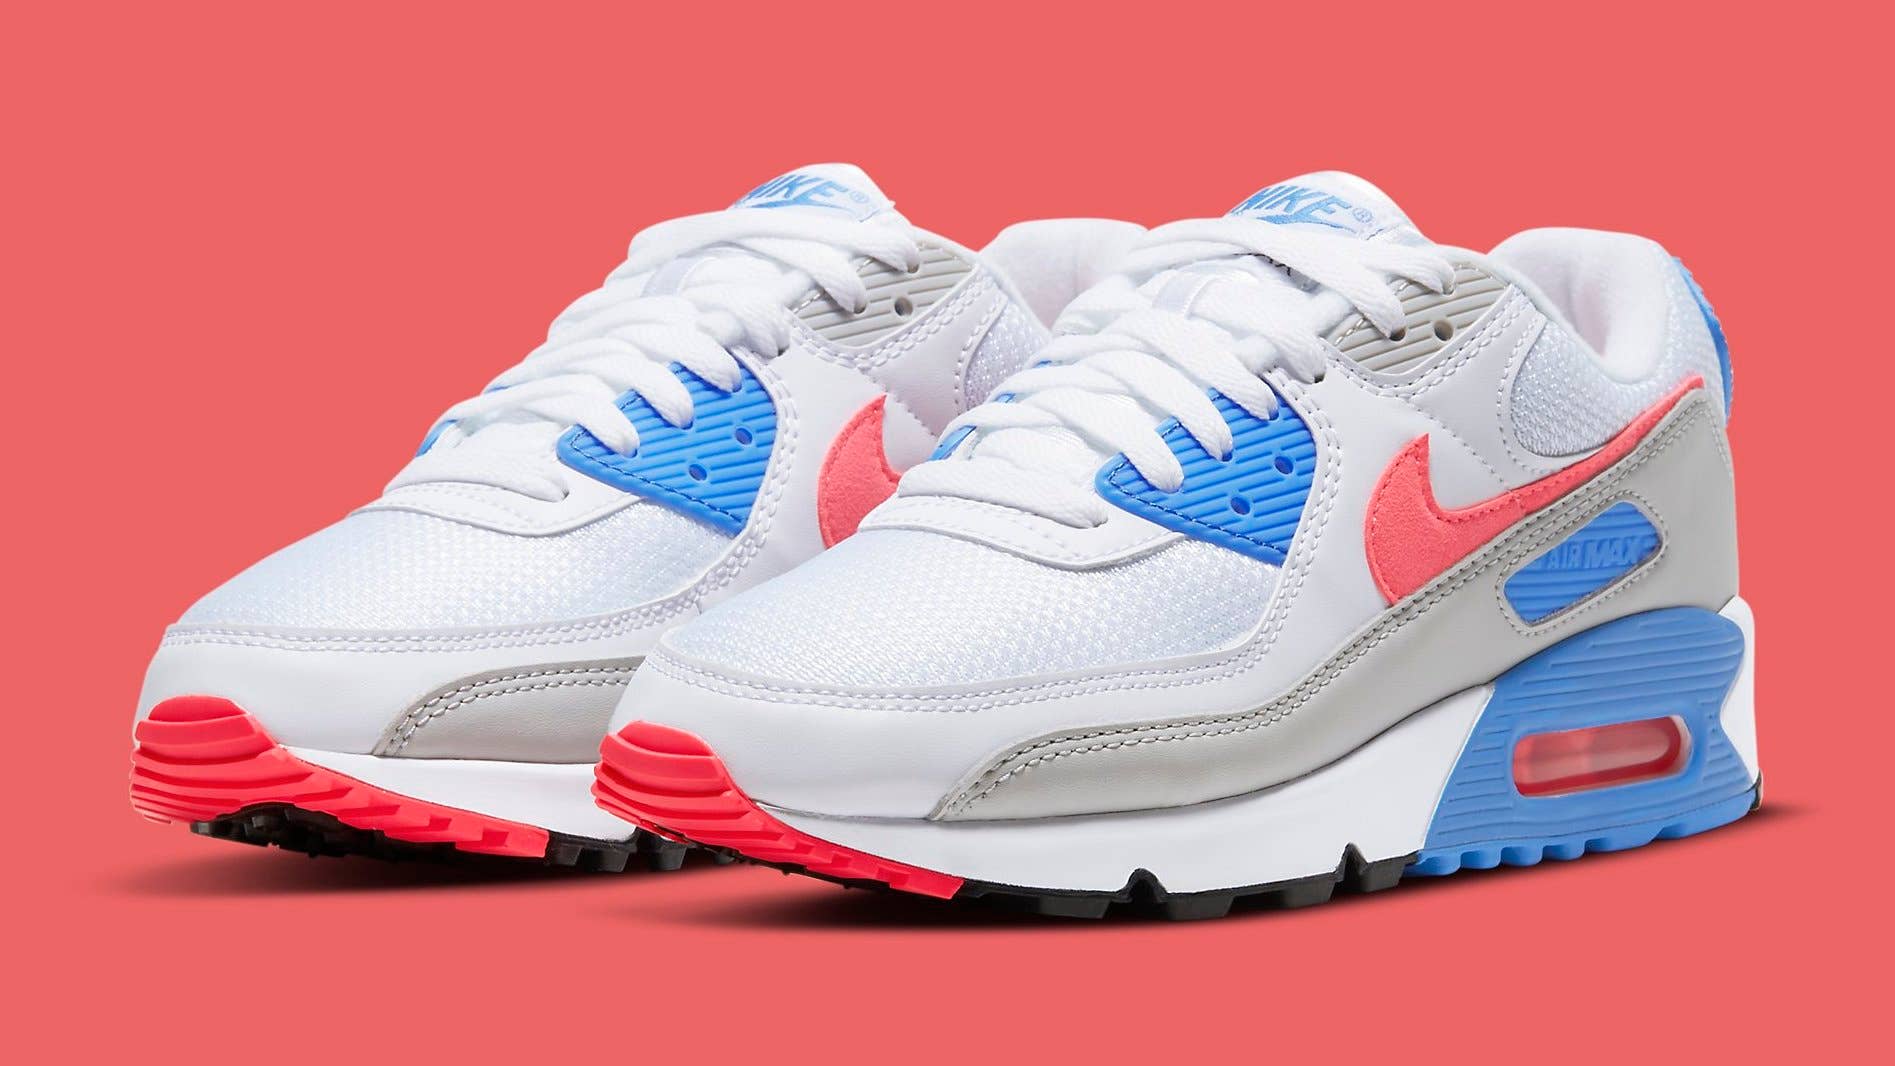 skærm forvridning fysisk This OG Air Max 90 Colorway Is Returning Soon | Complex